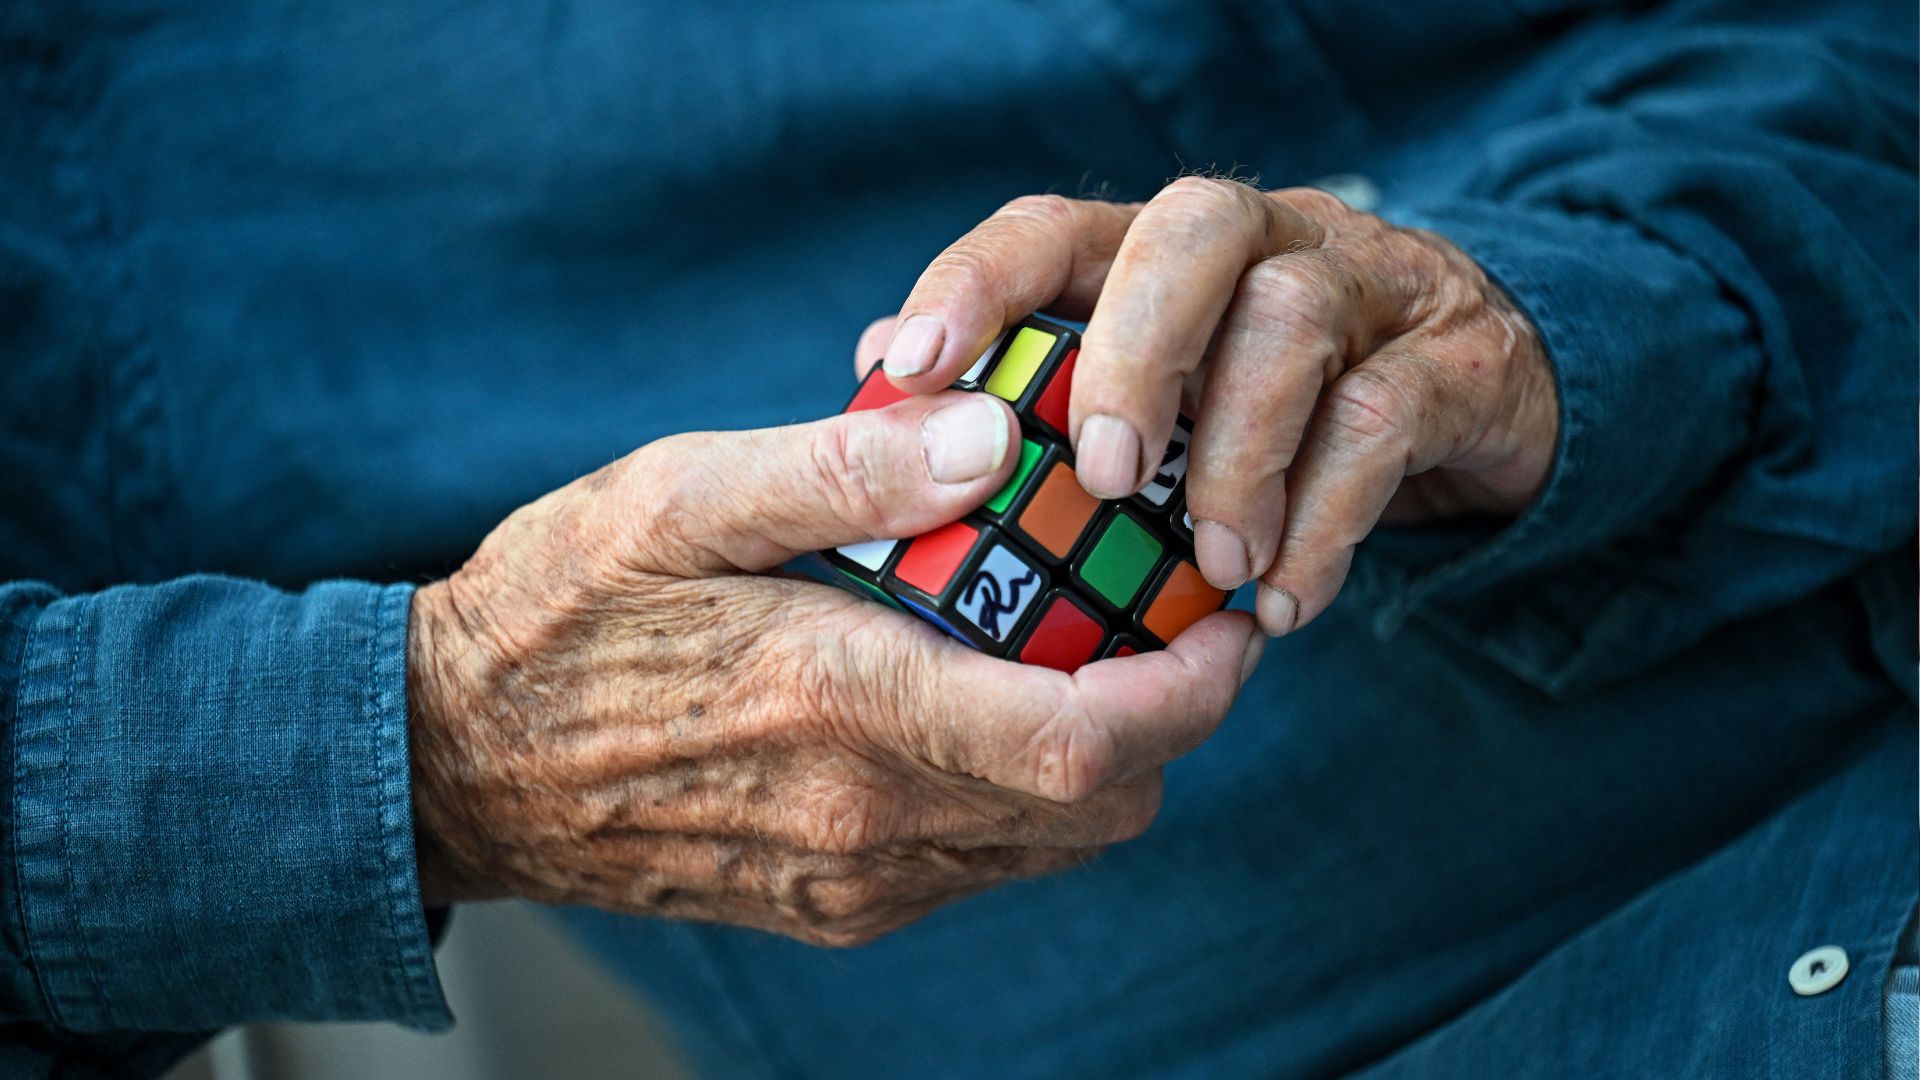 Erno Rubik holds a Rubik's Cube 3D puzzle in his hands. /Attila Kisbenedek/AFP